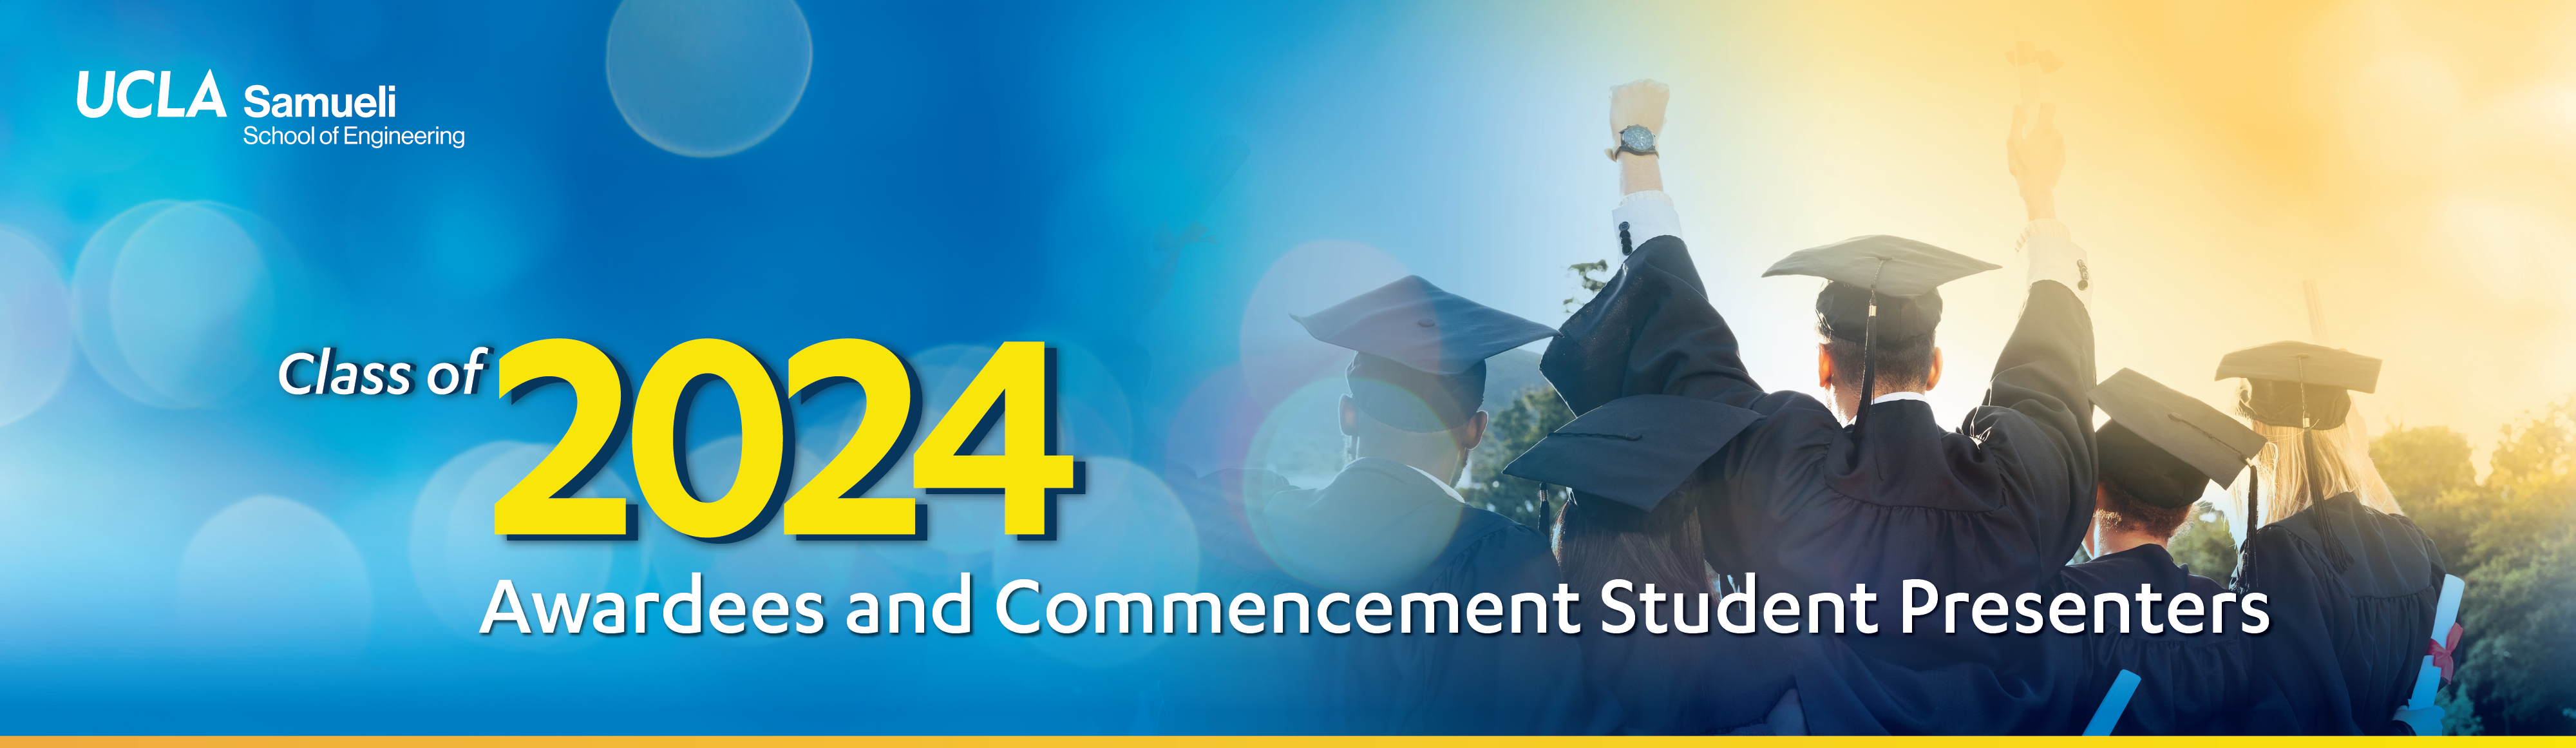 2024 commencement awardees-banner1